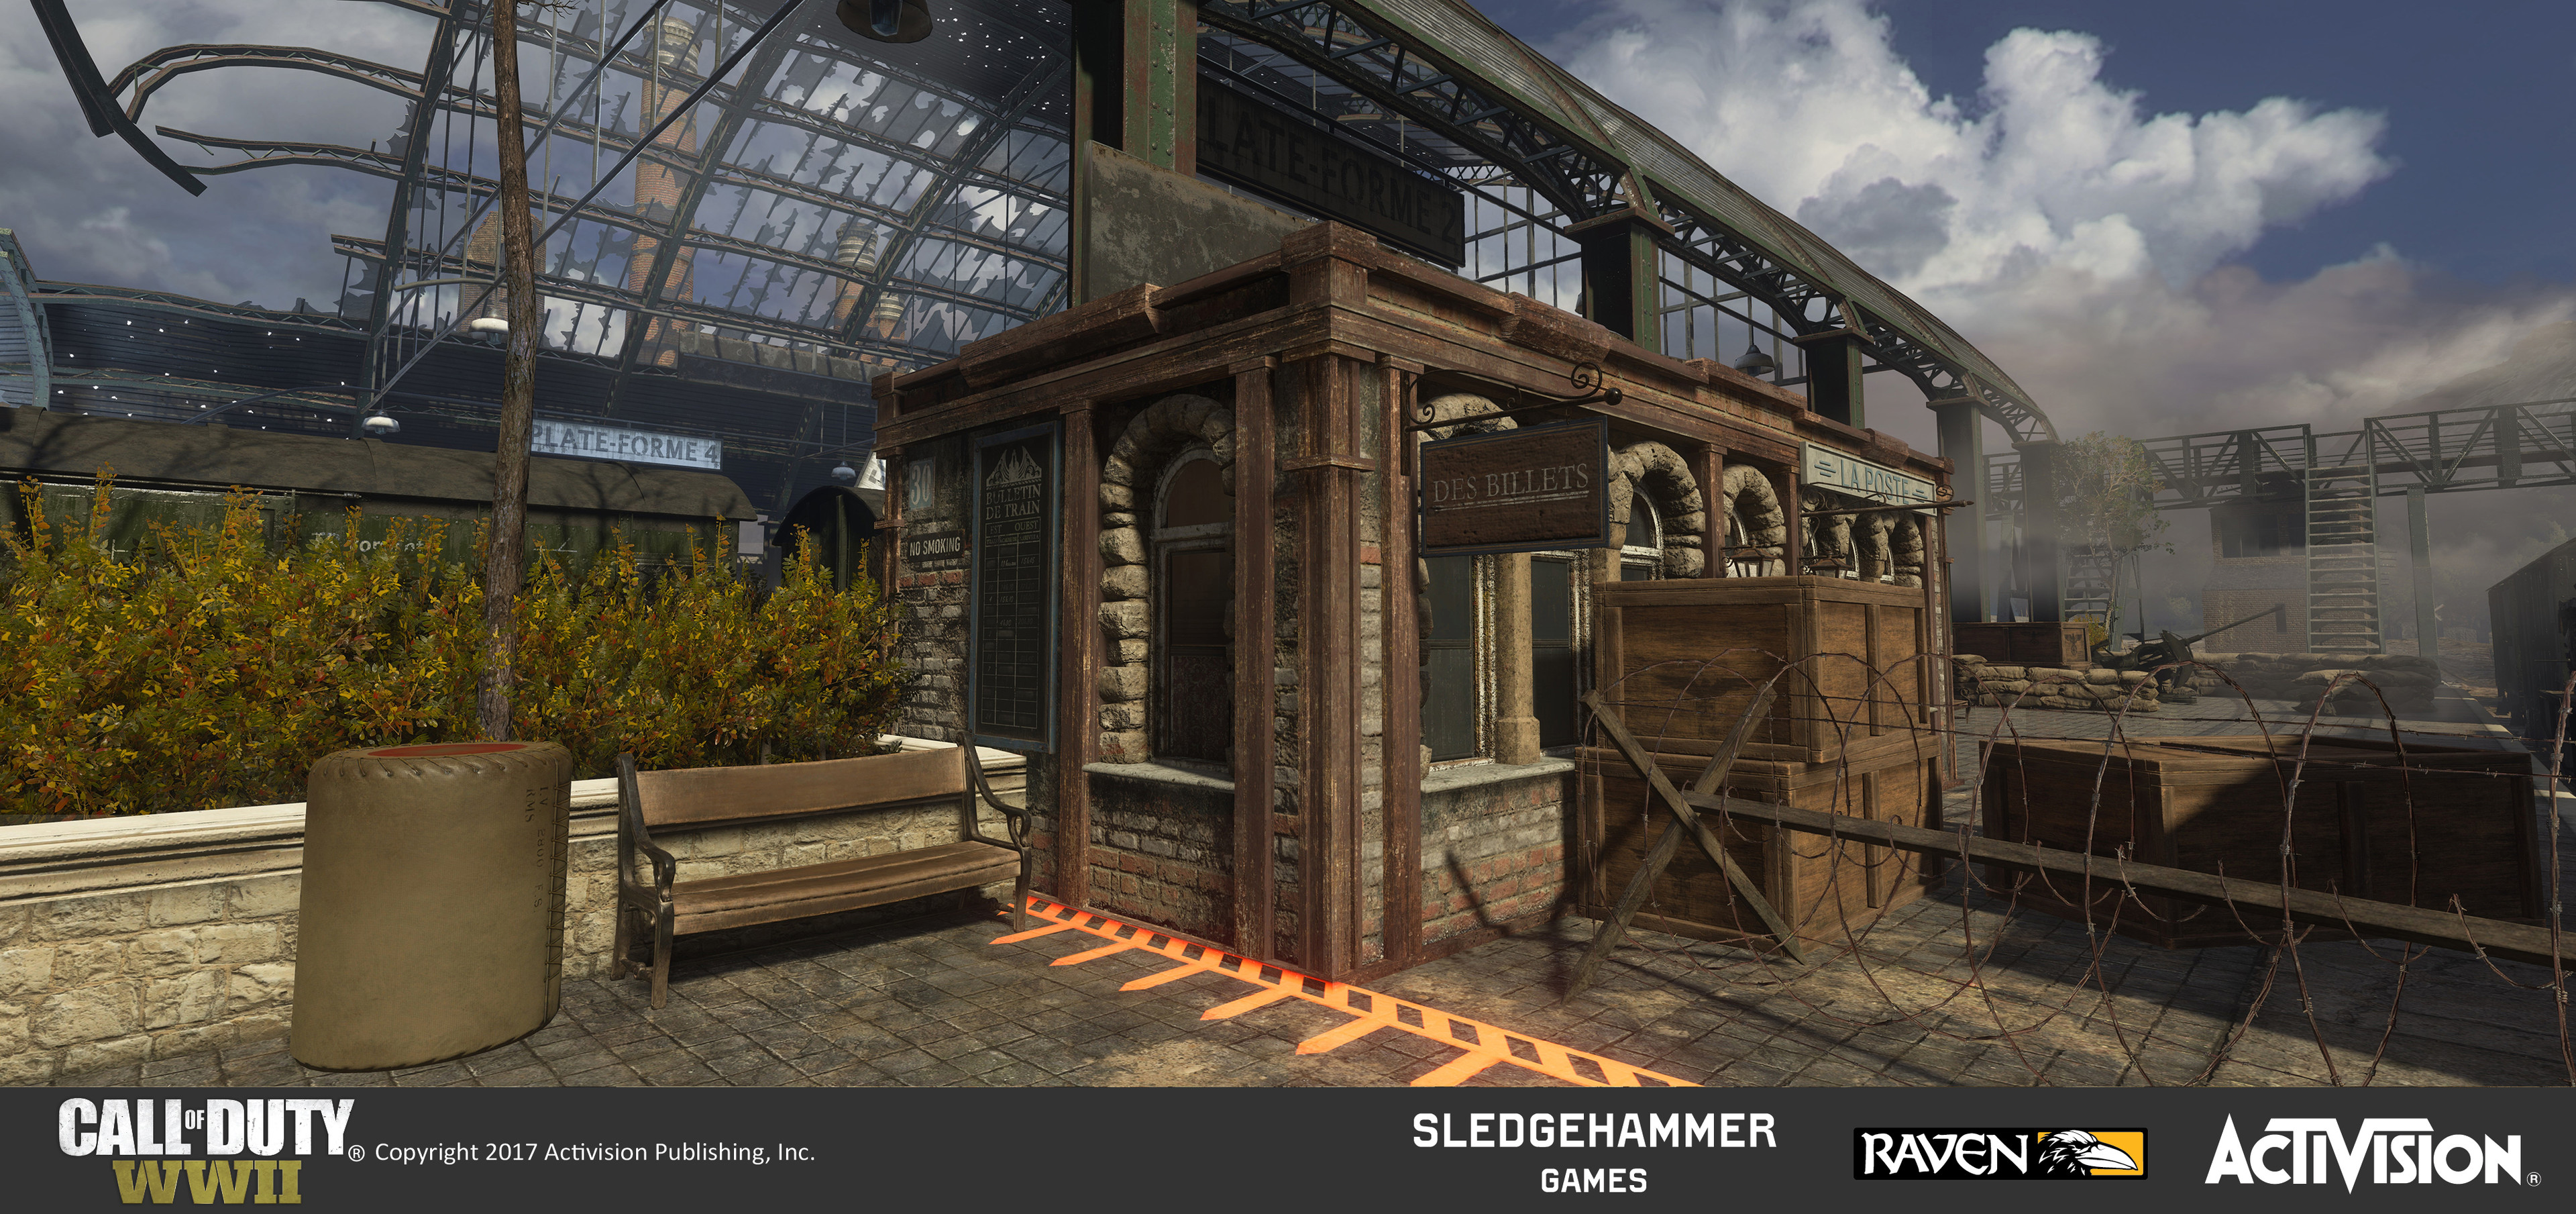 This is a ticket booth structure I created for use in several places in the Train Station. I created the geo using pre-existing materials arranged in a unique treatment and I added the stoned arch windows I made to stylistically match the train station.